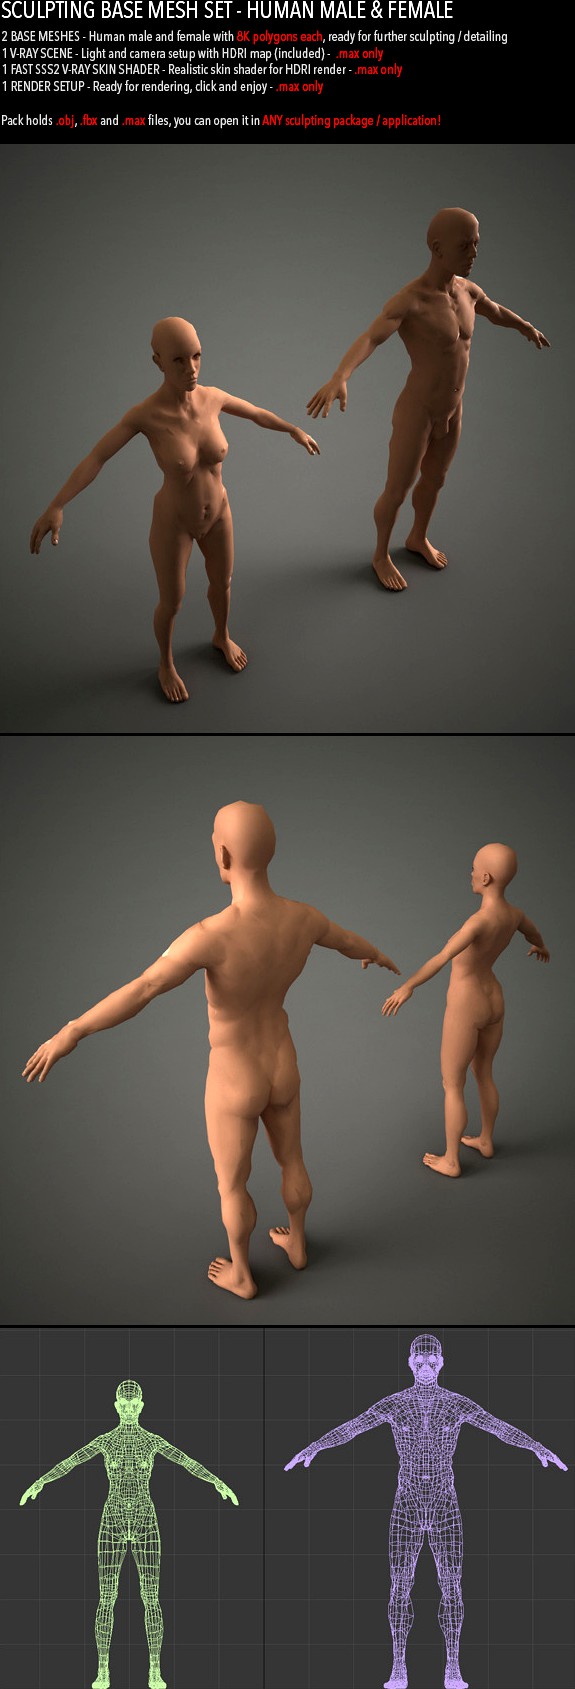 Sculpting Base Mesh Pack - Human Male and Female